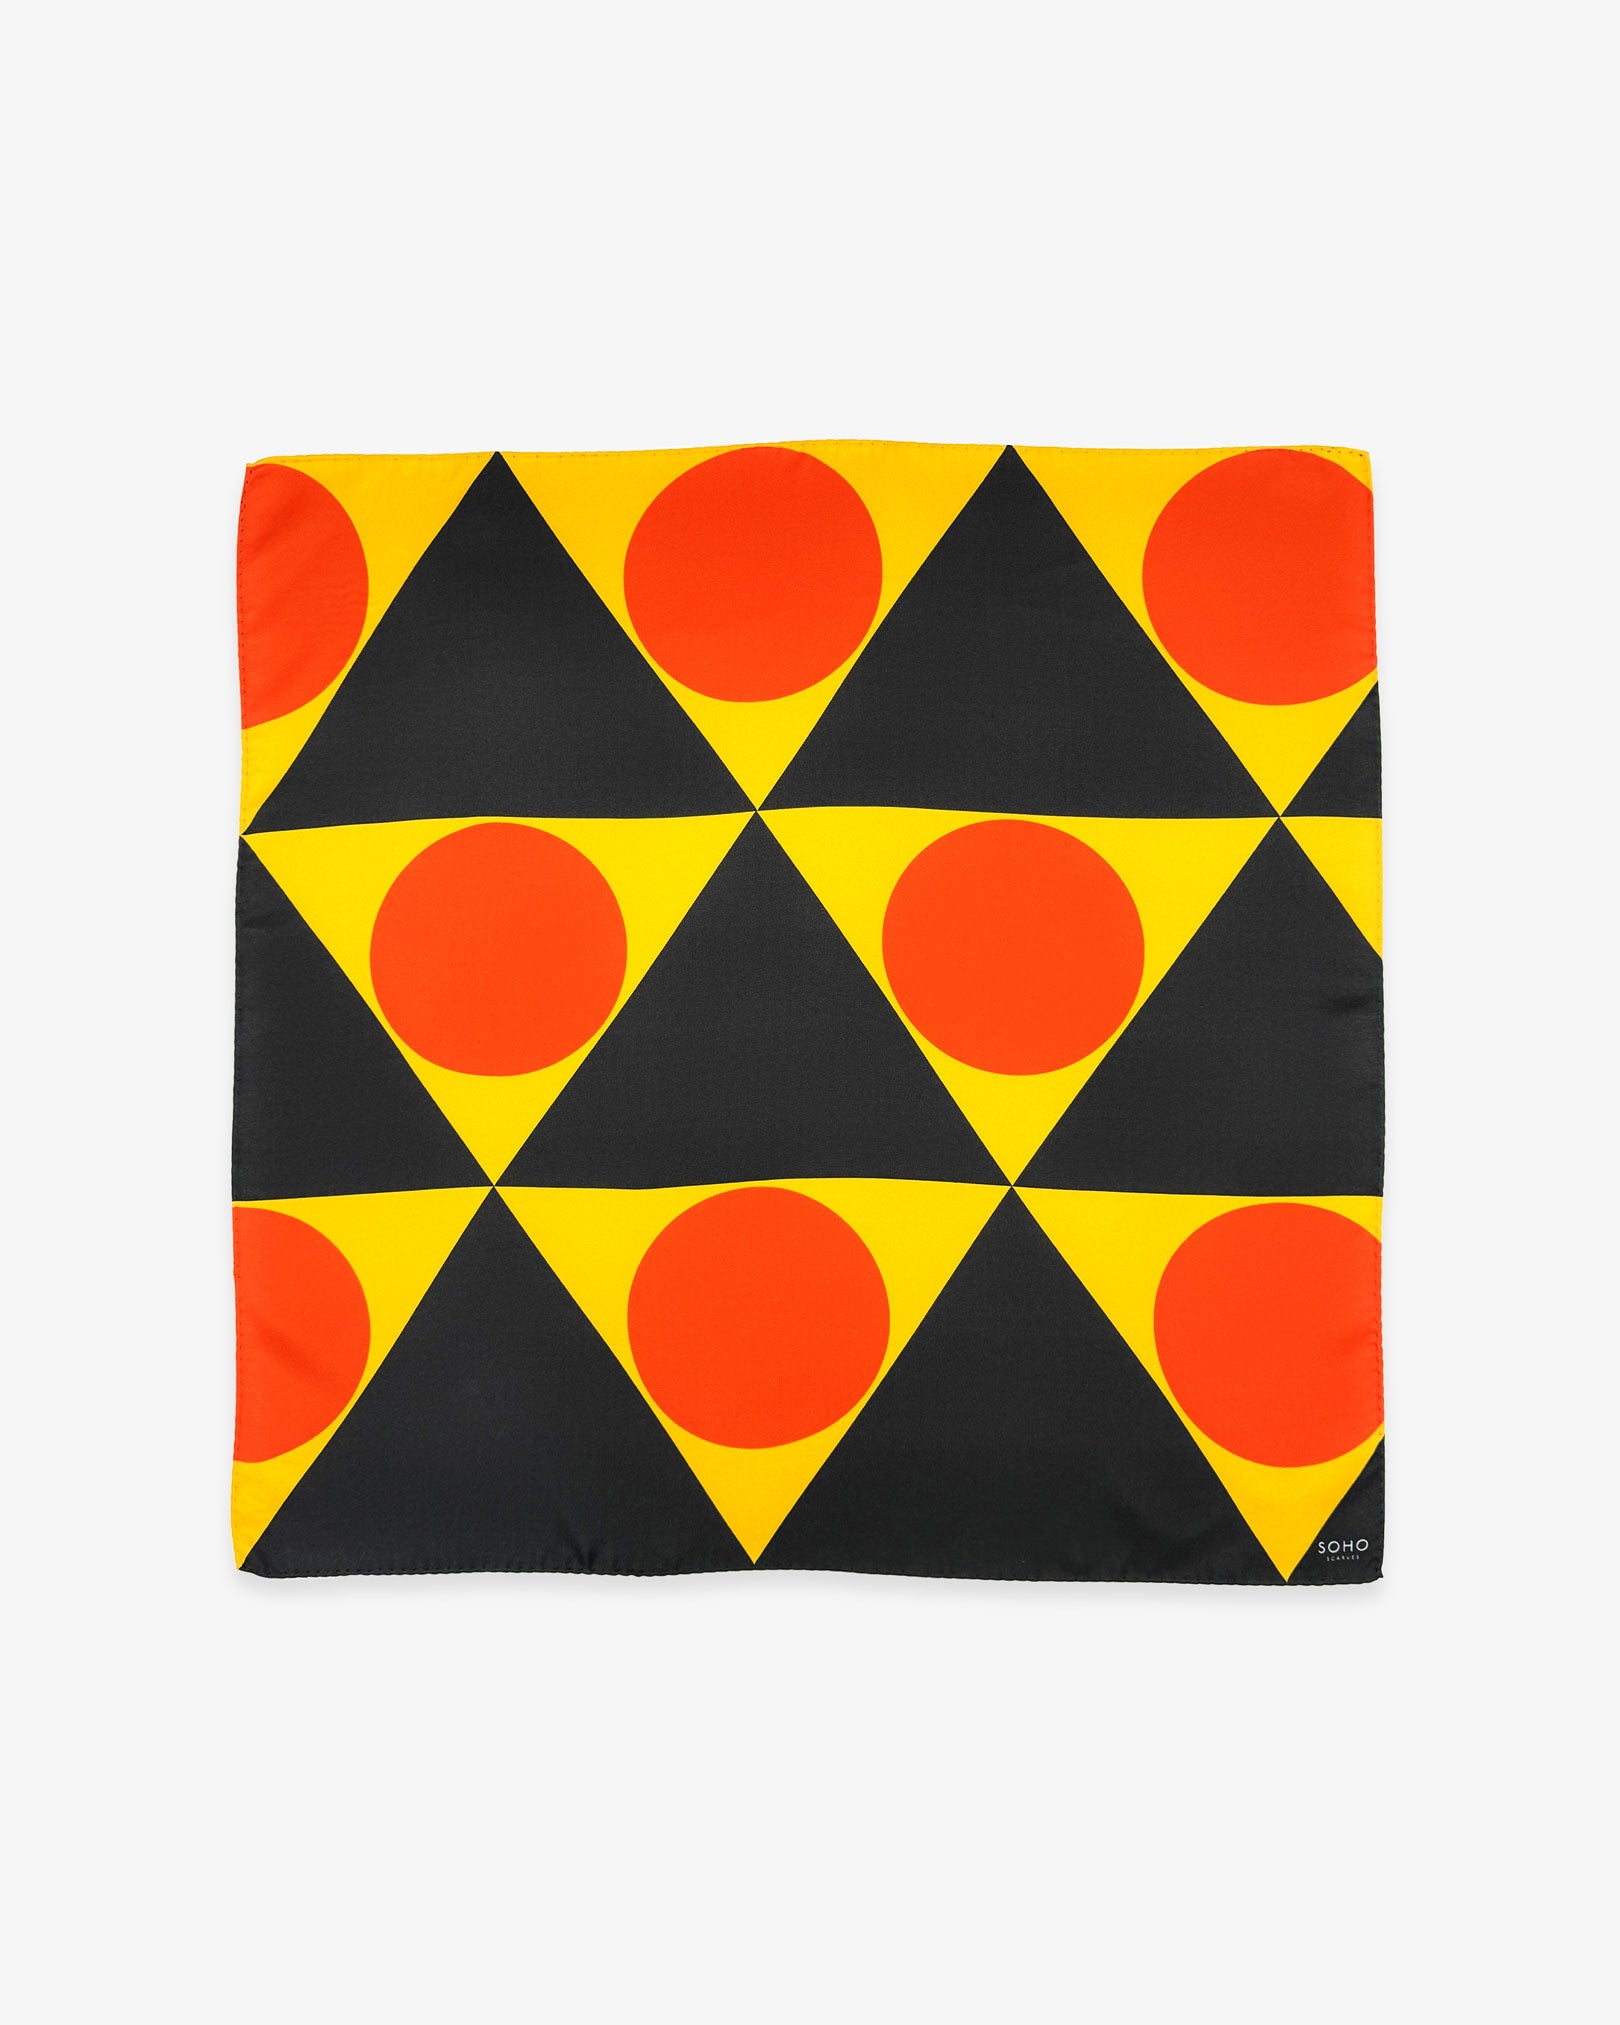 Unfolded 'Dresden' silk neckerchief, showing the triangular shapes of yellow and dark grey with orange discs.